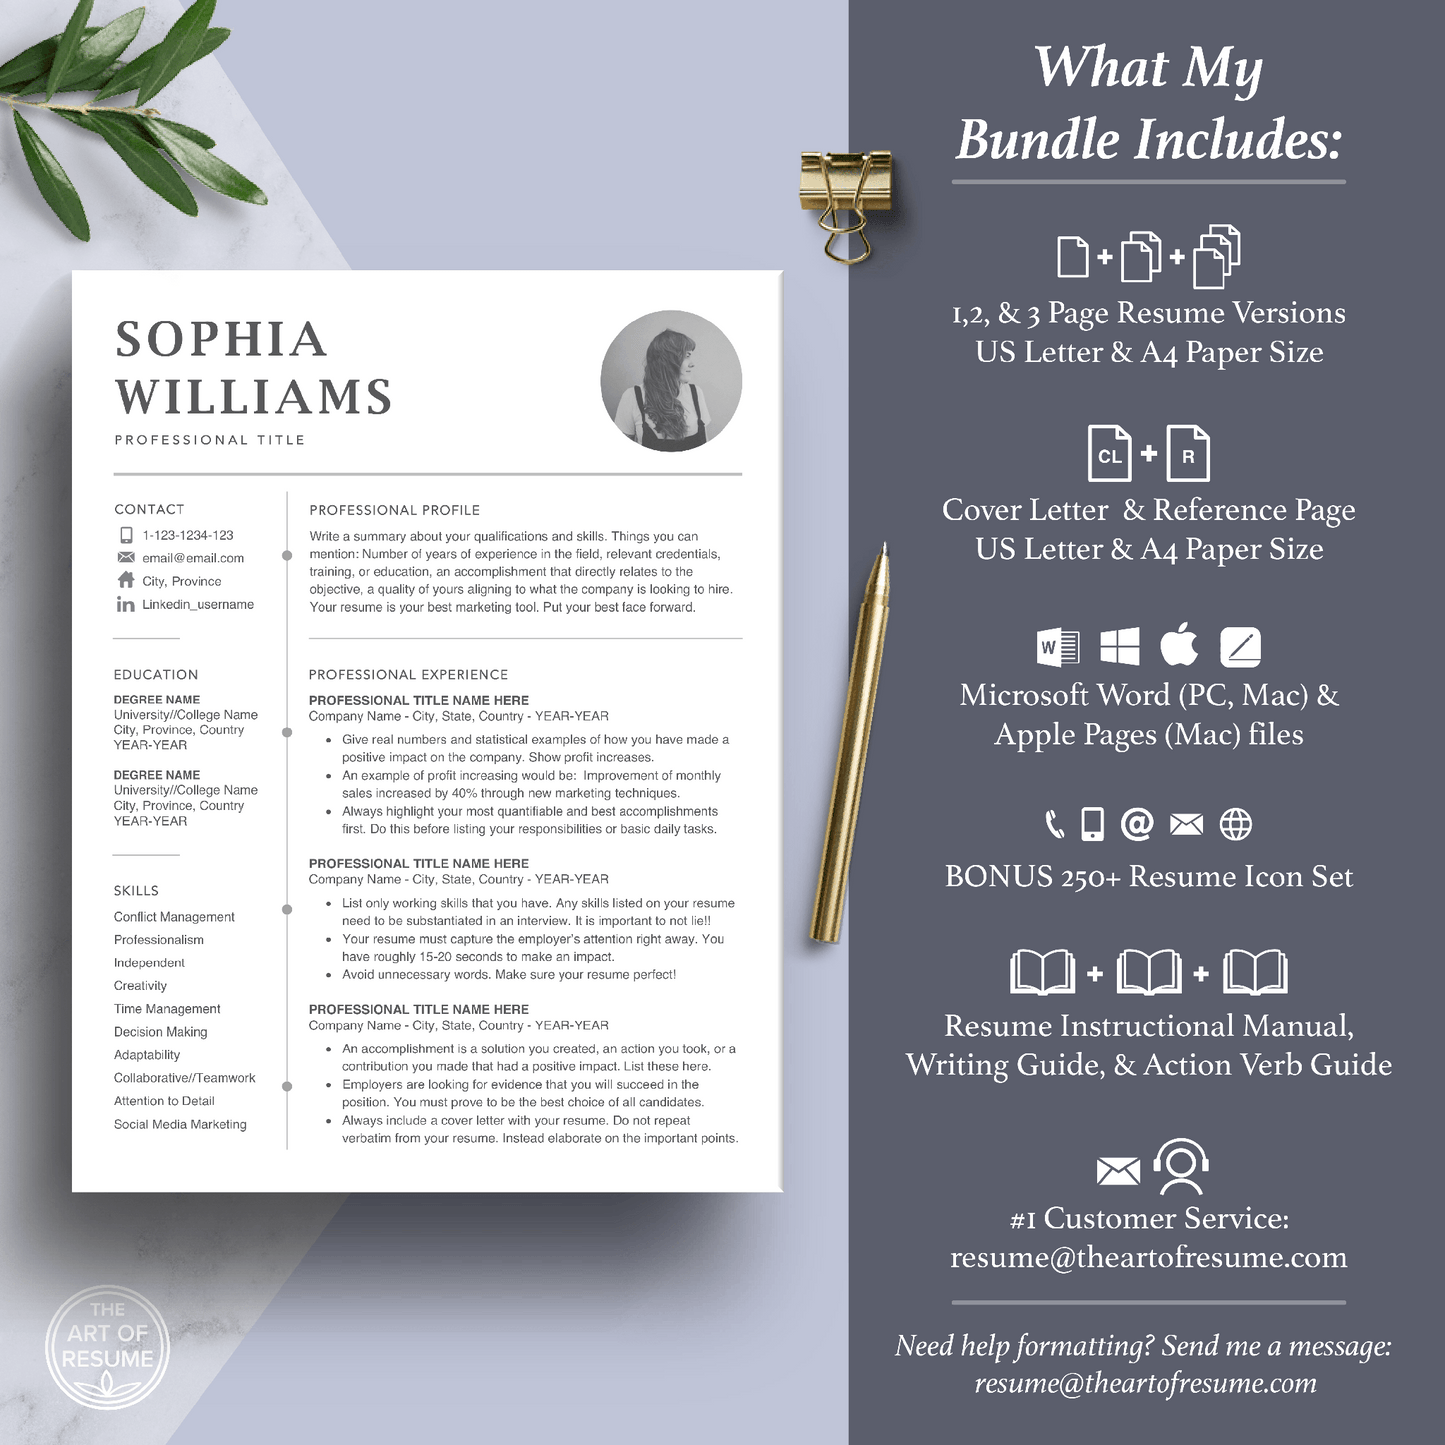 Professional Resume with Photo | Creative Resume Template - The Art of Resume